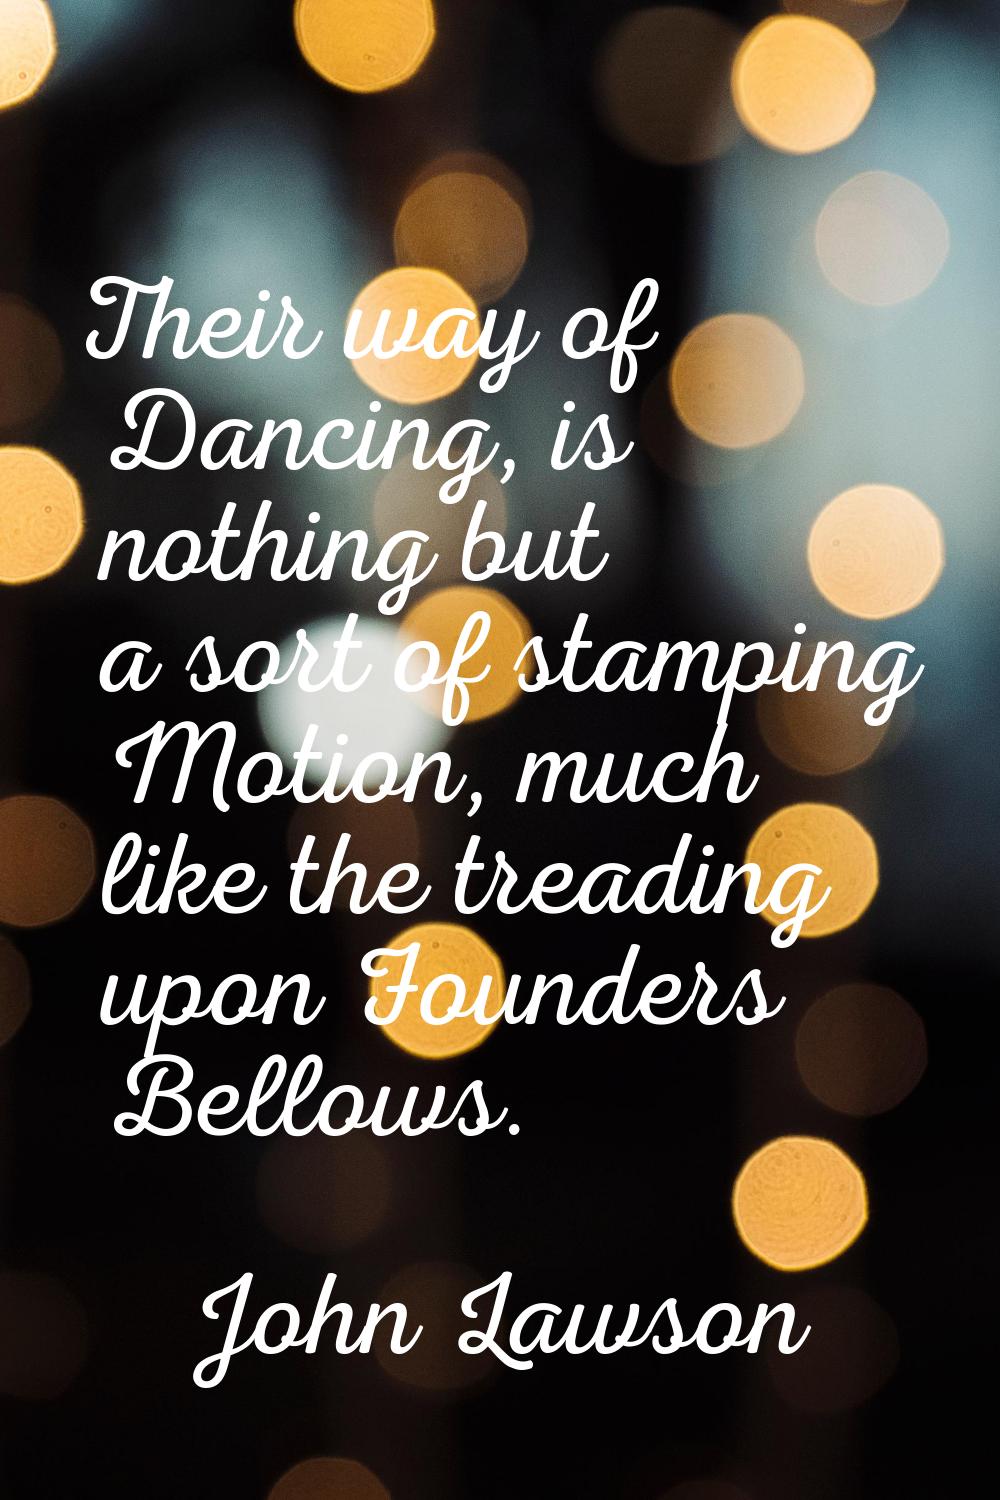 Their way of Dancing, is nothing but a sort of stamping Motion, much like the treading upon Founder